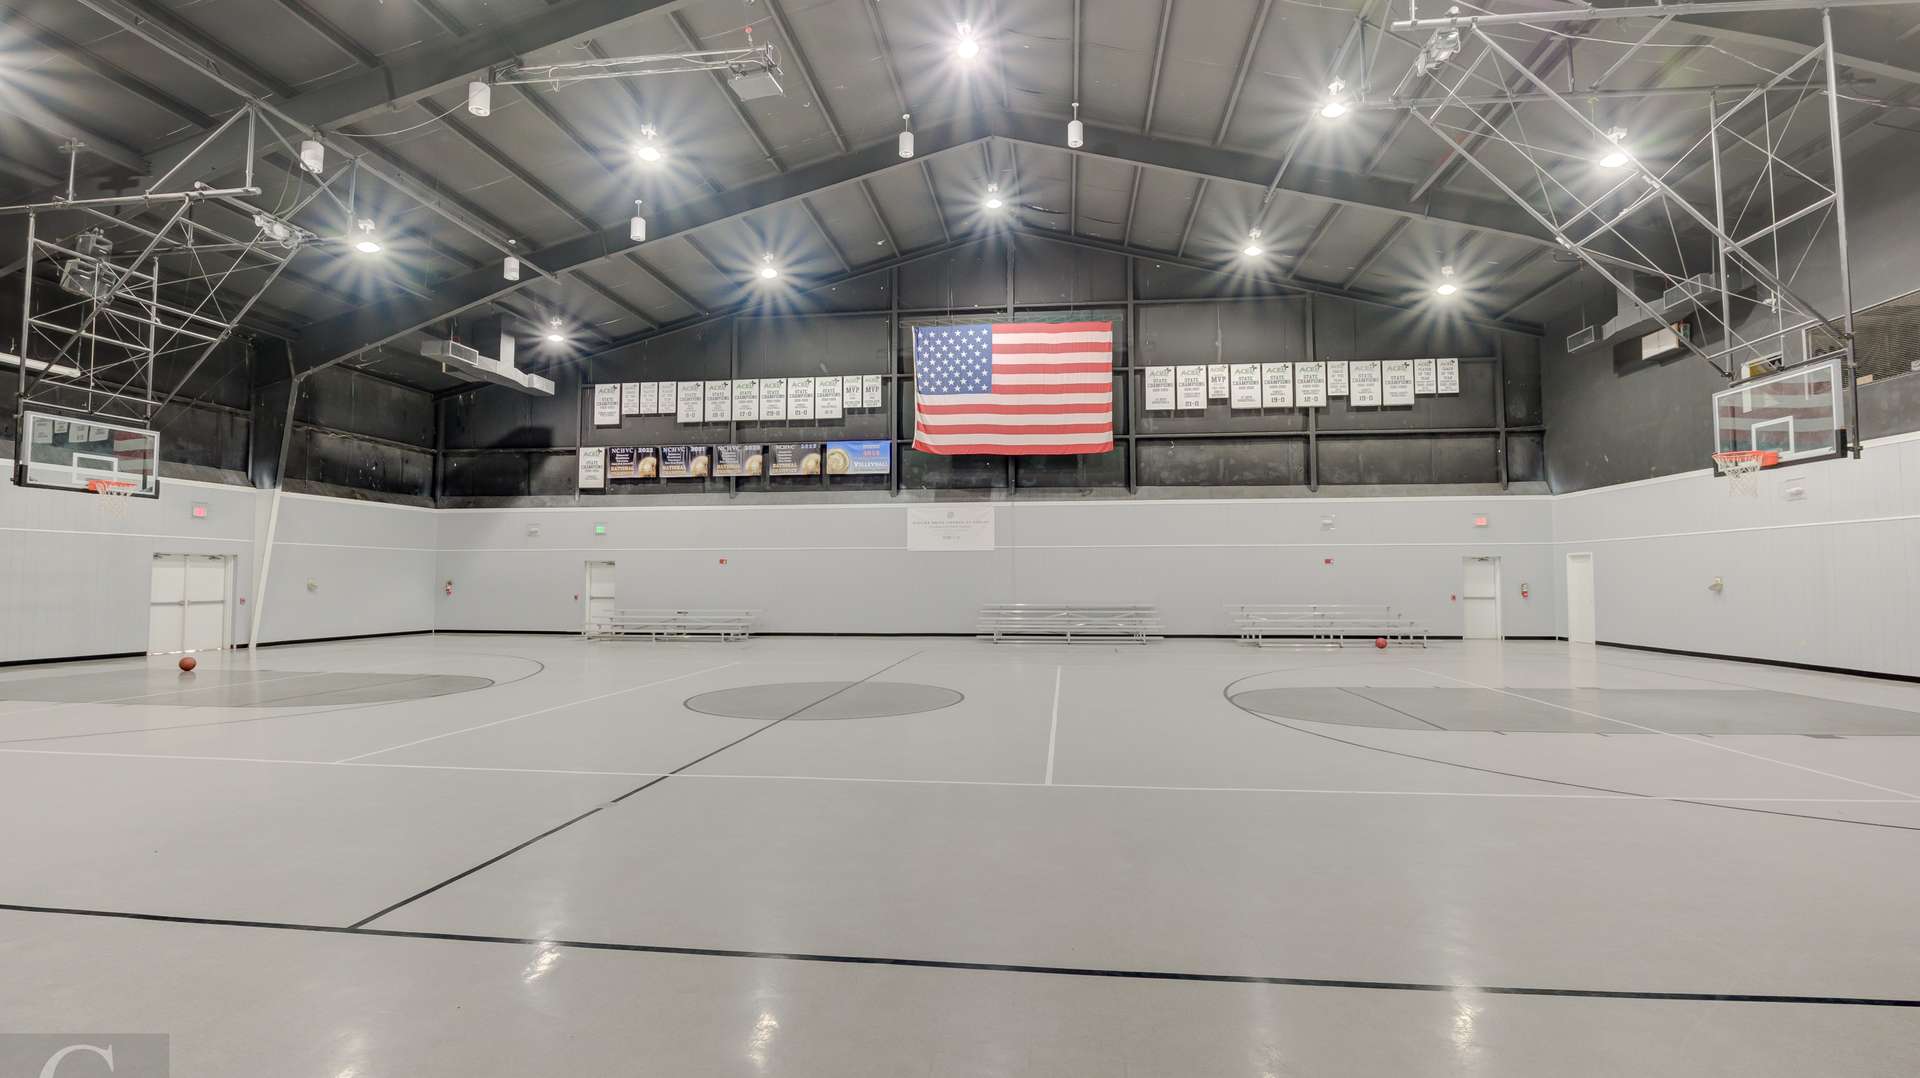 68 of 70. Gymnasium building is nearly 24,000 heated square feet